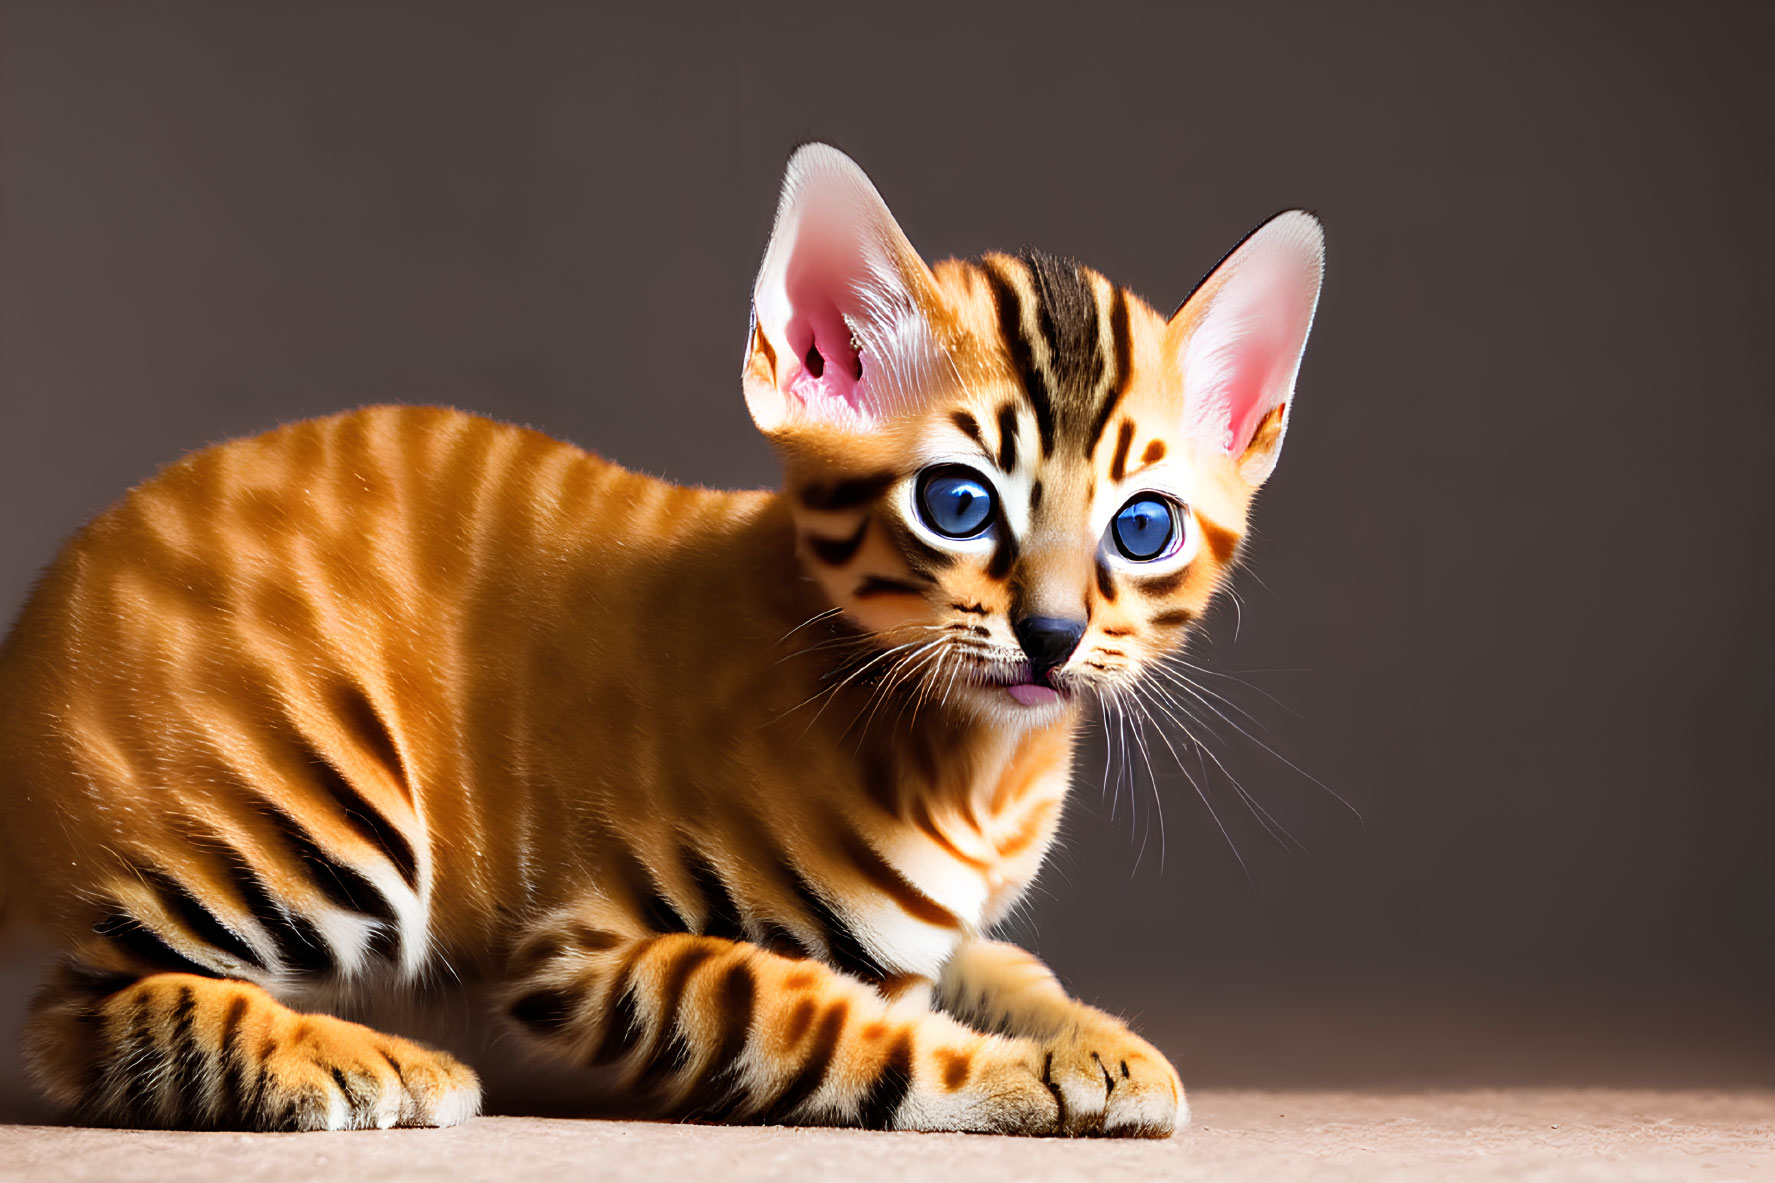 Bengal Cat with Unique Coat Patterns and Blue Eyes on Neutral Background